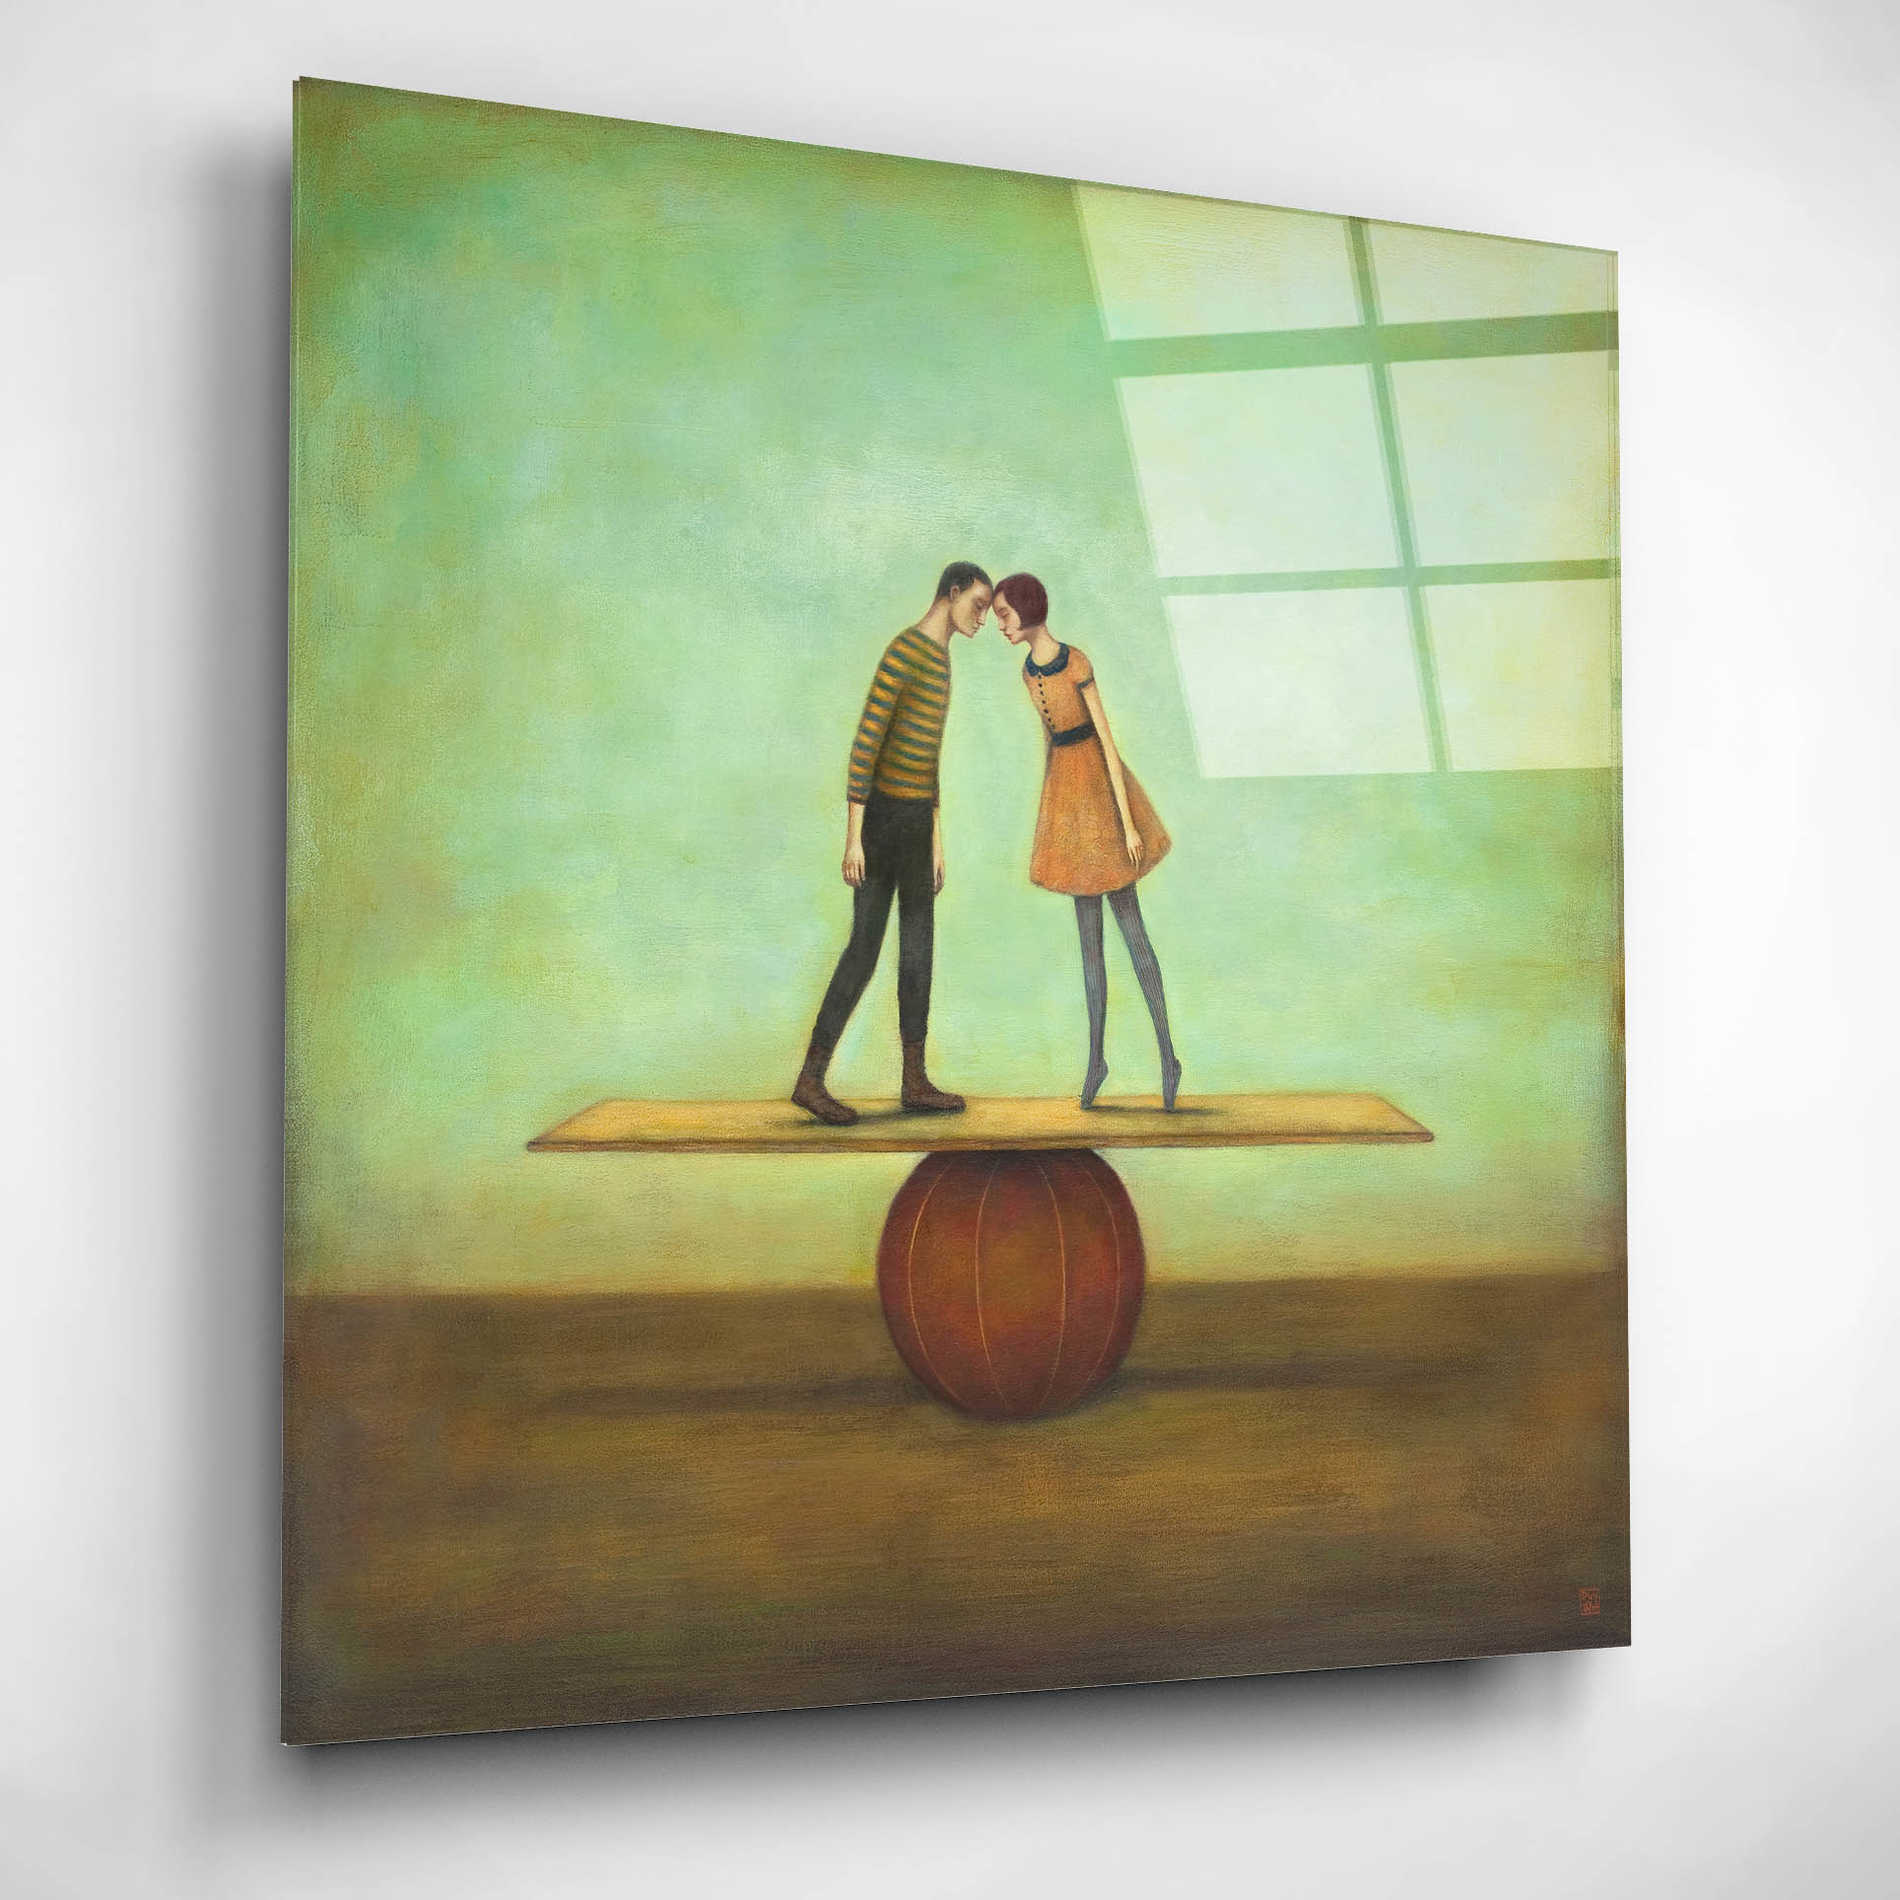 Epic Art 'Finding Equilibrium' by Duy Huynh, Acrylic Glass Wall Art,12x12